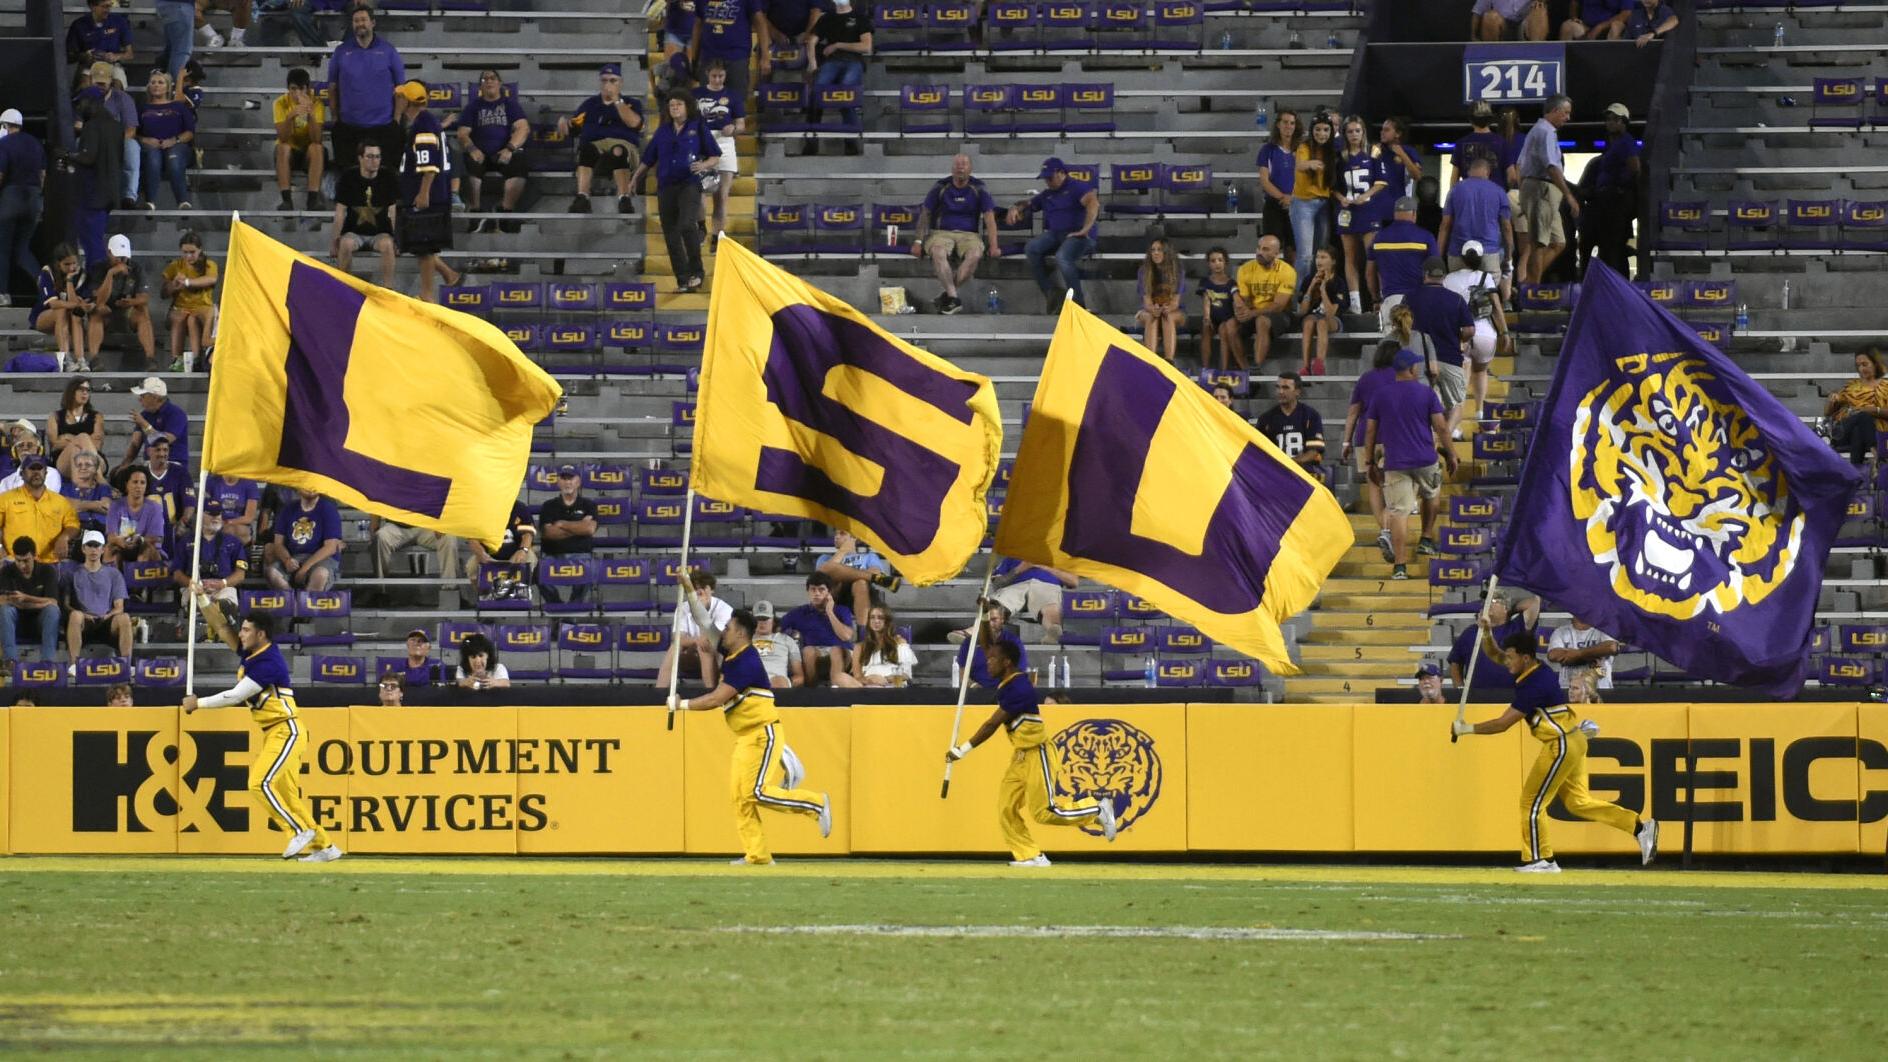 Lsu Football Schedule 2022 Printable Ready For 2022? Lsu Football Schedule Released; See The Tigers' Key Dates,  Opponents | Lsu | Theadvocate.com